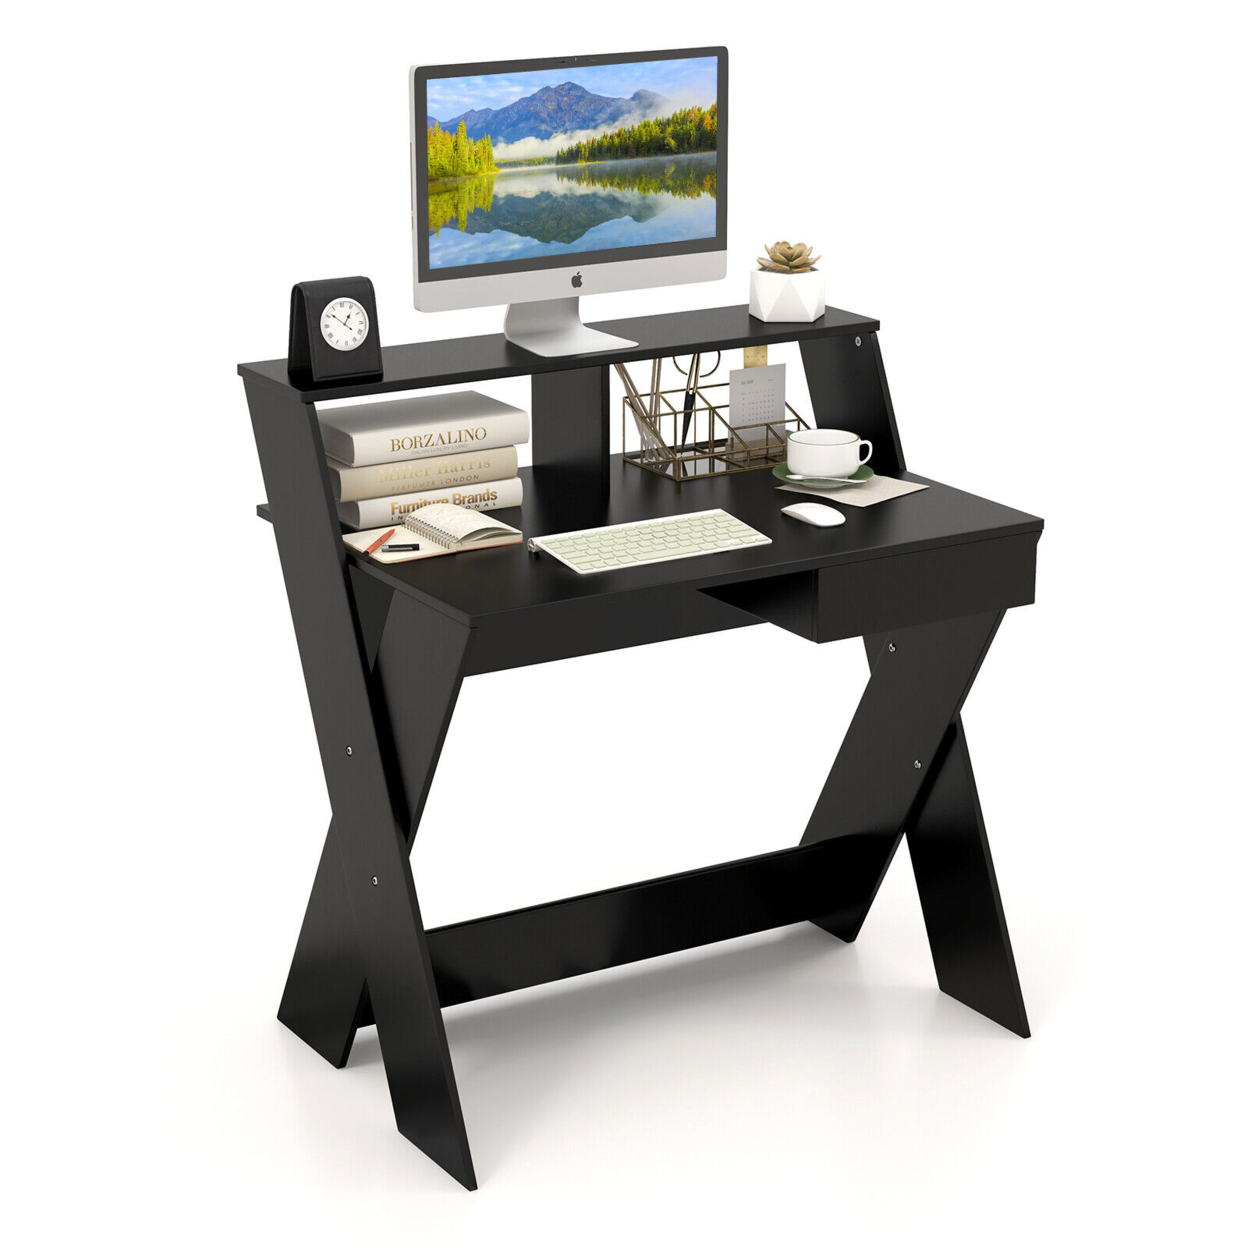 Computer Desk Study Writing Table Small Space W/ Drawer & Monitor Stand - Black